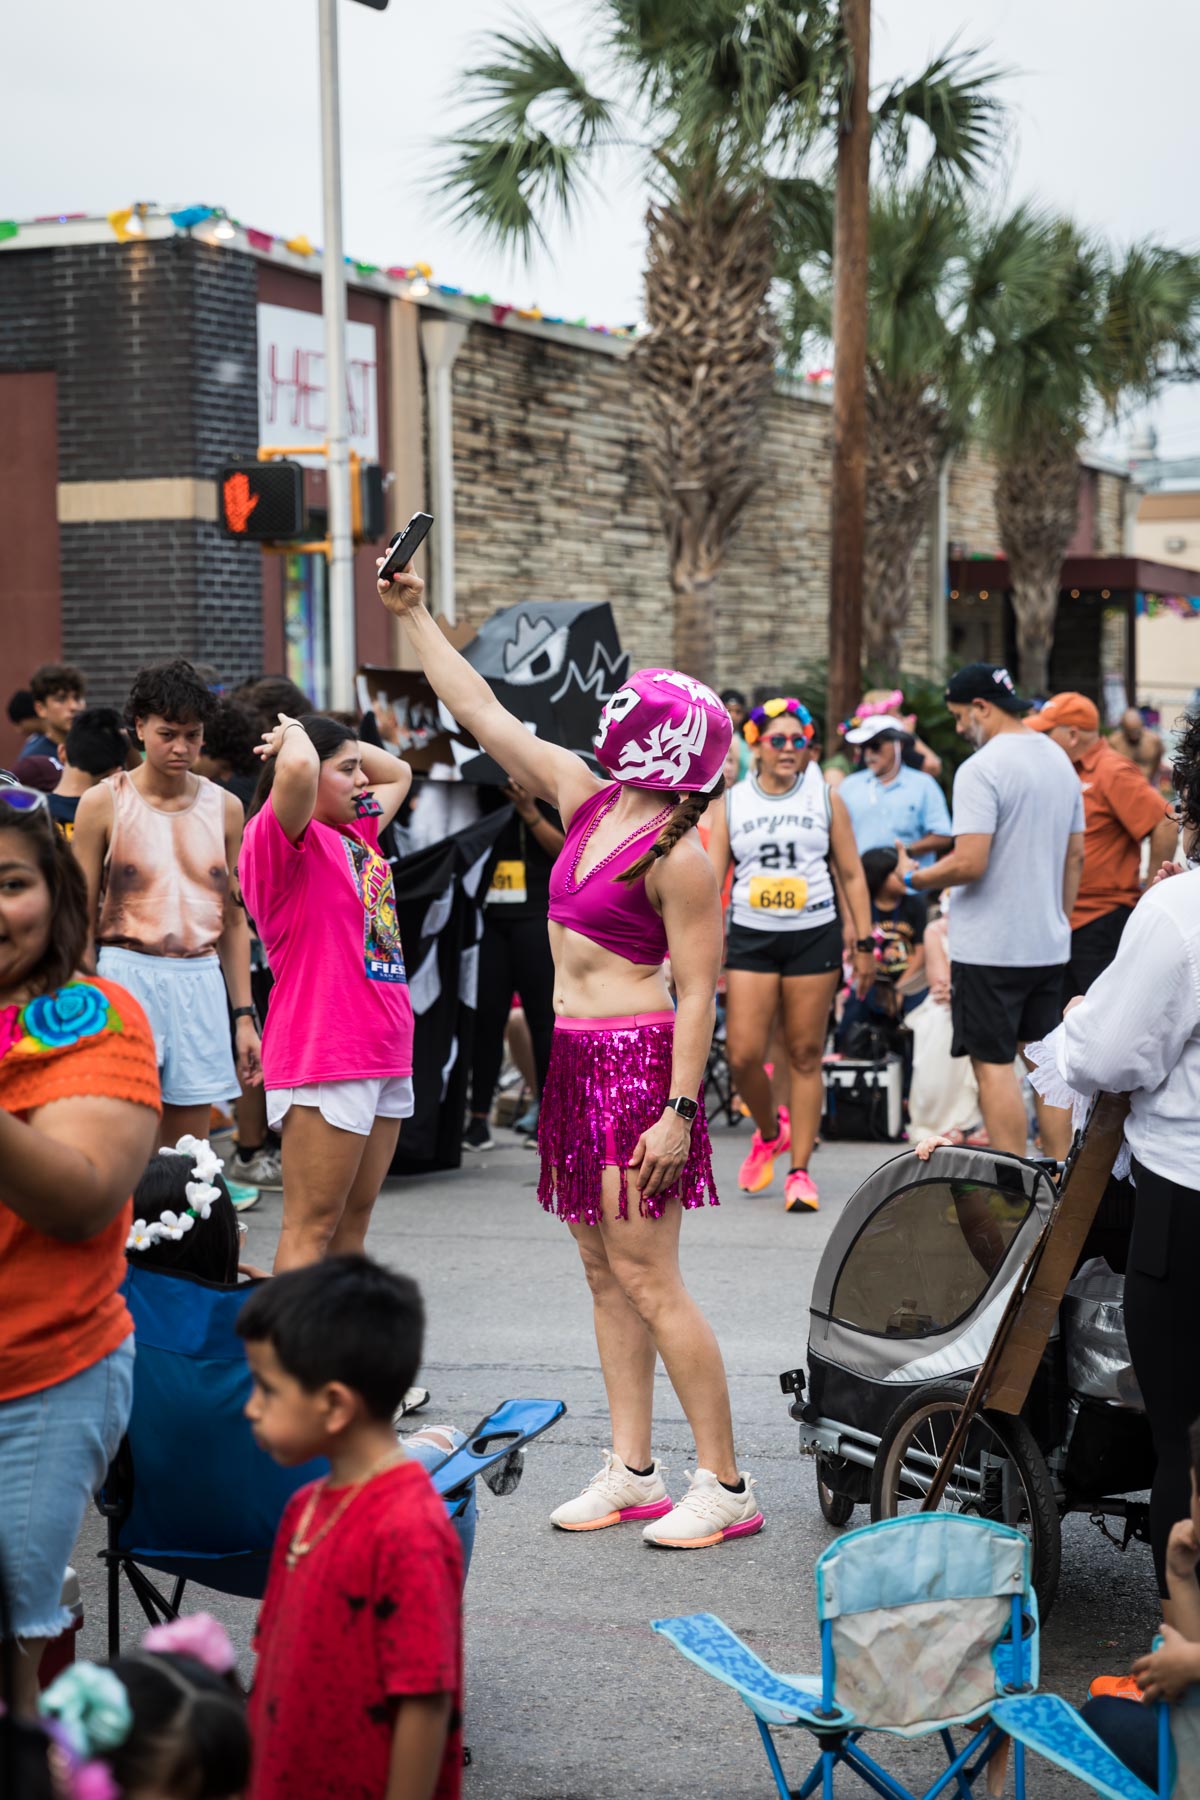 Woman jogger taking selfie while wearing pink outfit and mask for an article on the Fiesta photo tips